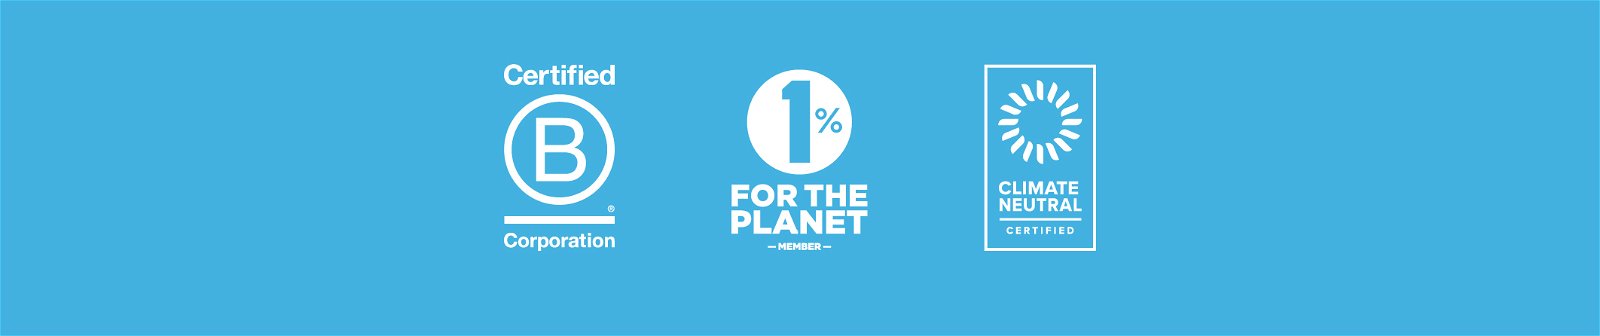 Our Commitments - Certified B Corp / 1% For The Planet / Climate Neutral